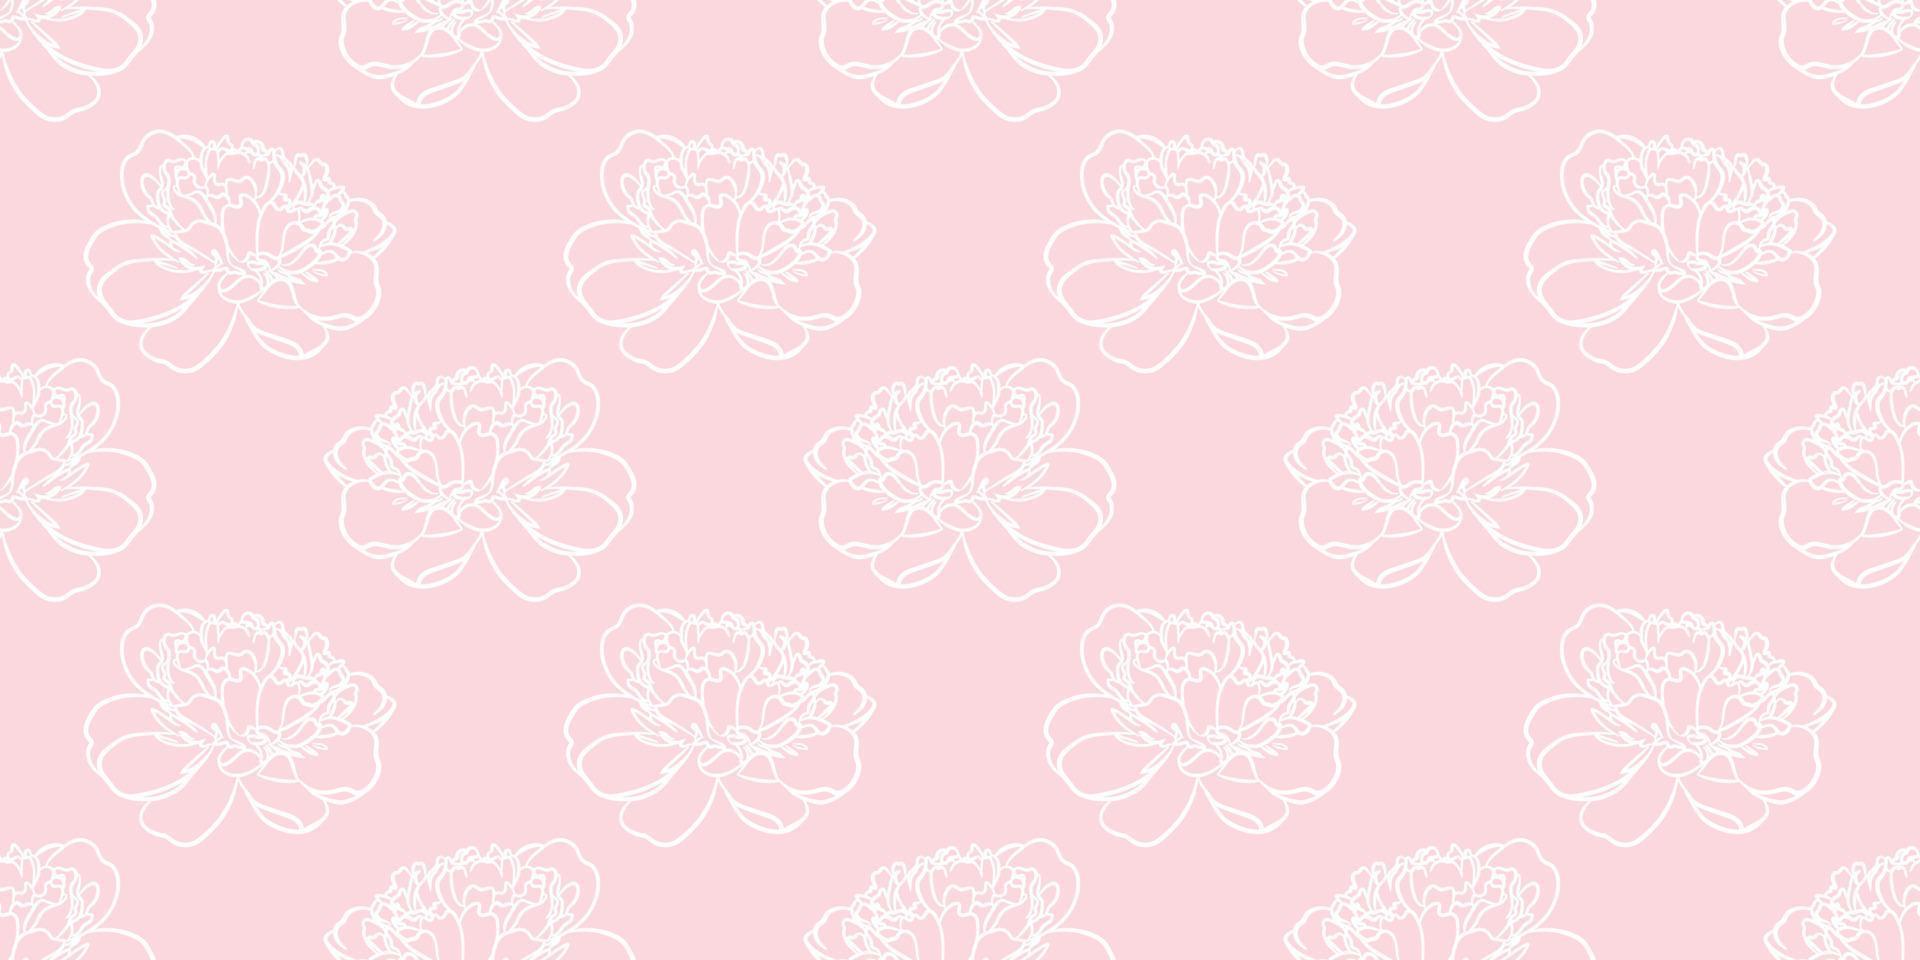 White and pink peony floral seamless vector repeat pattern